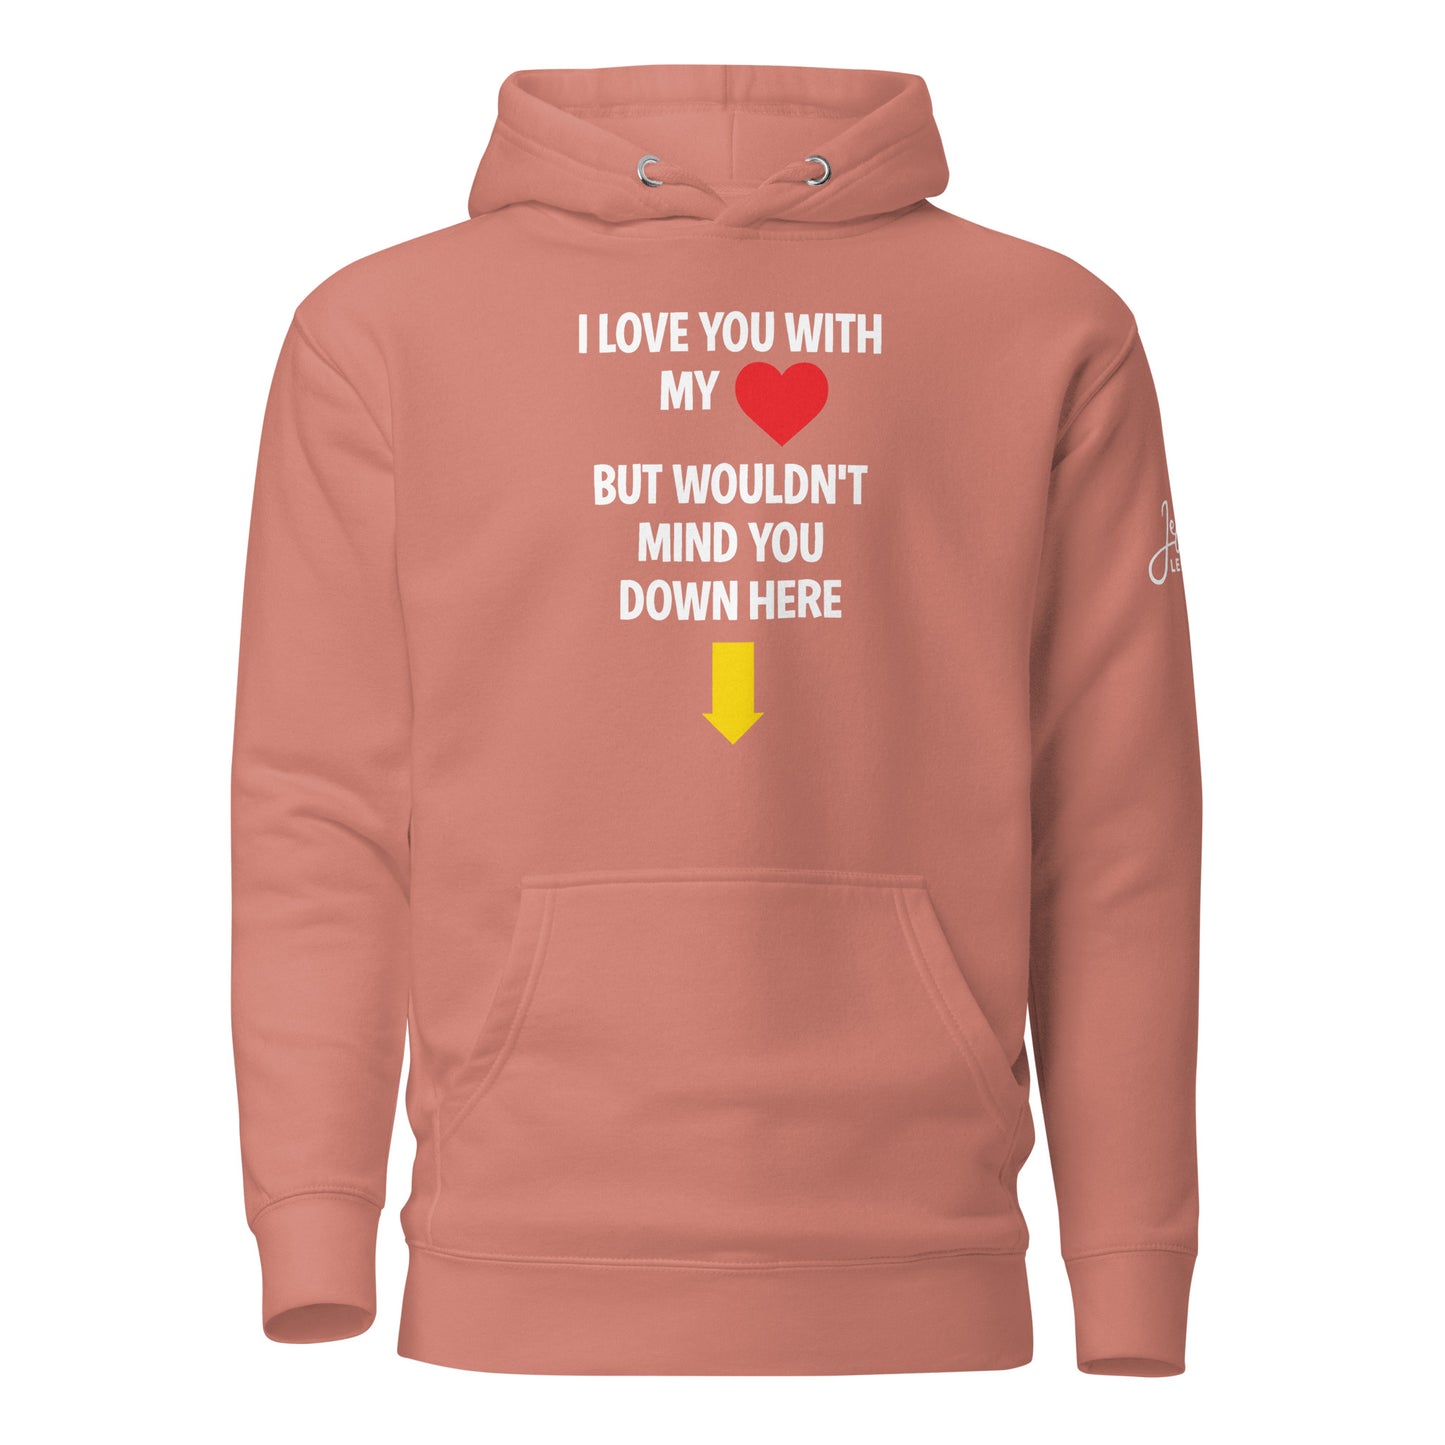 I Love You With My Heart Hoodie